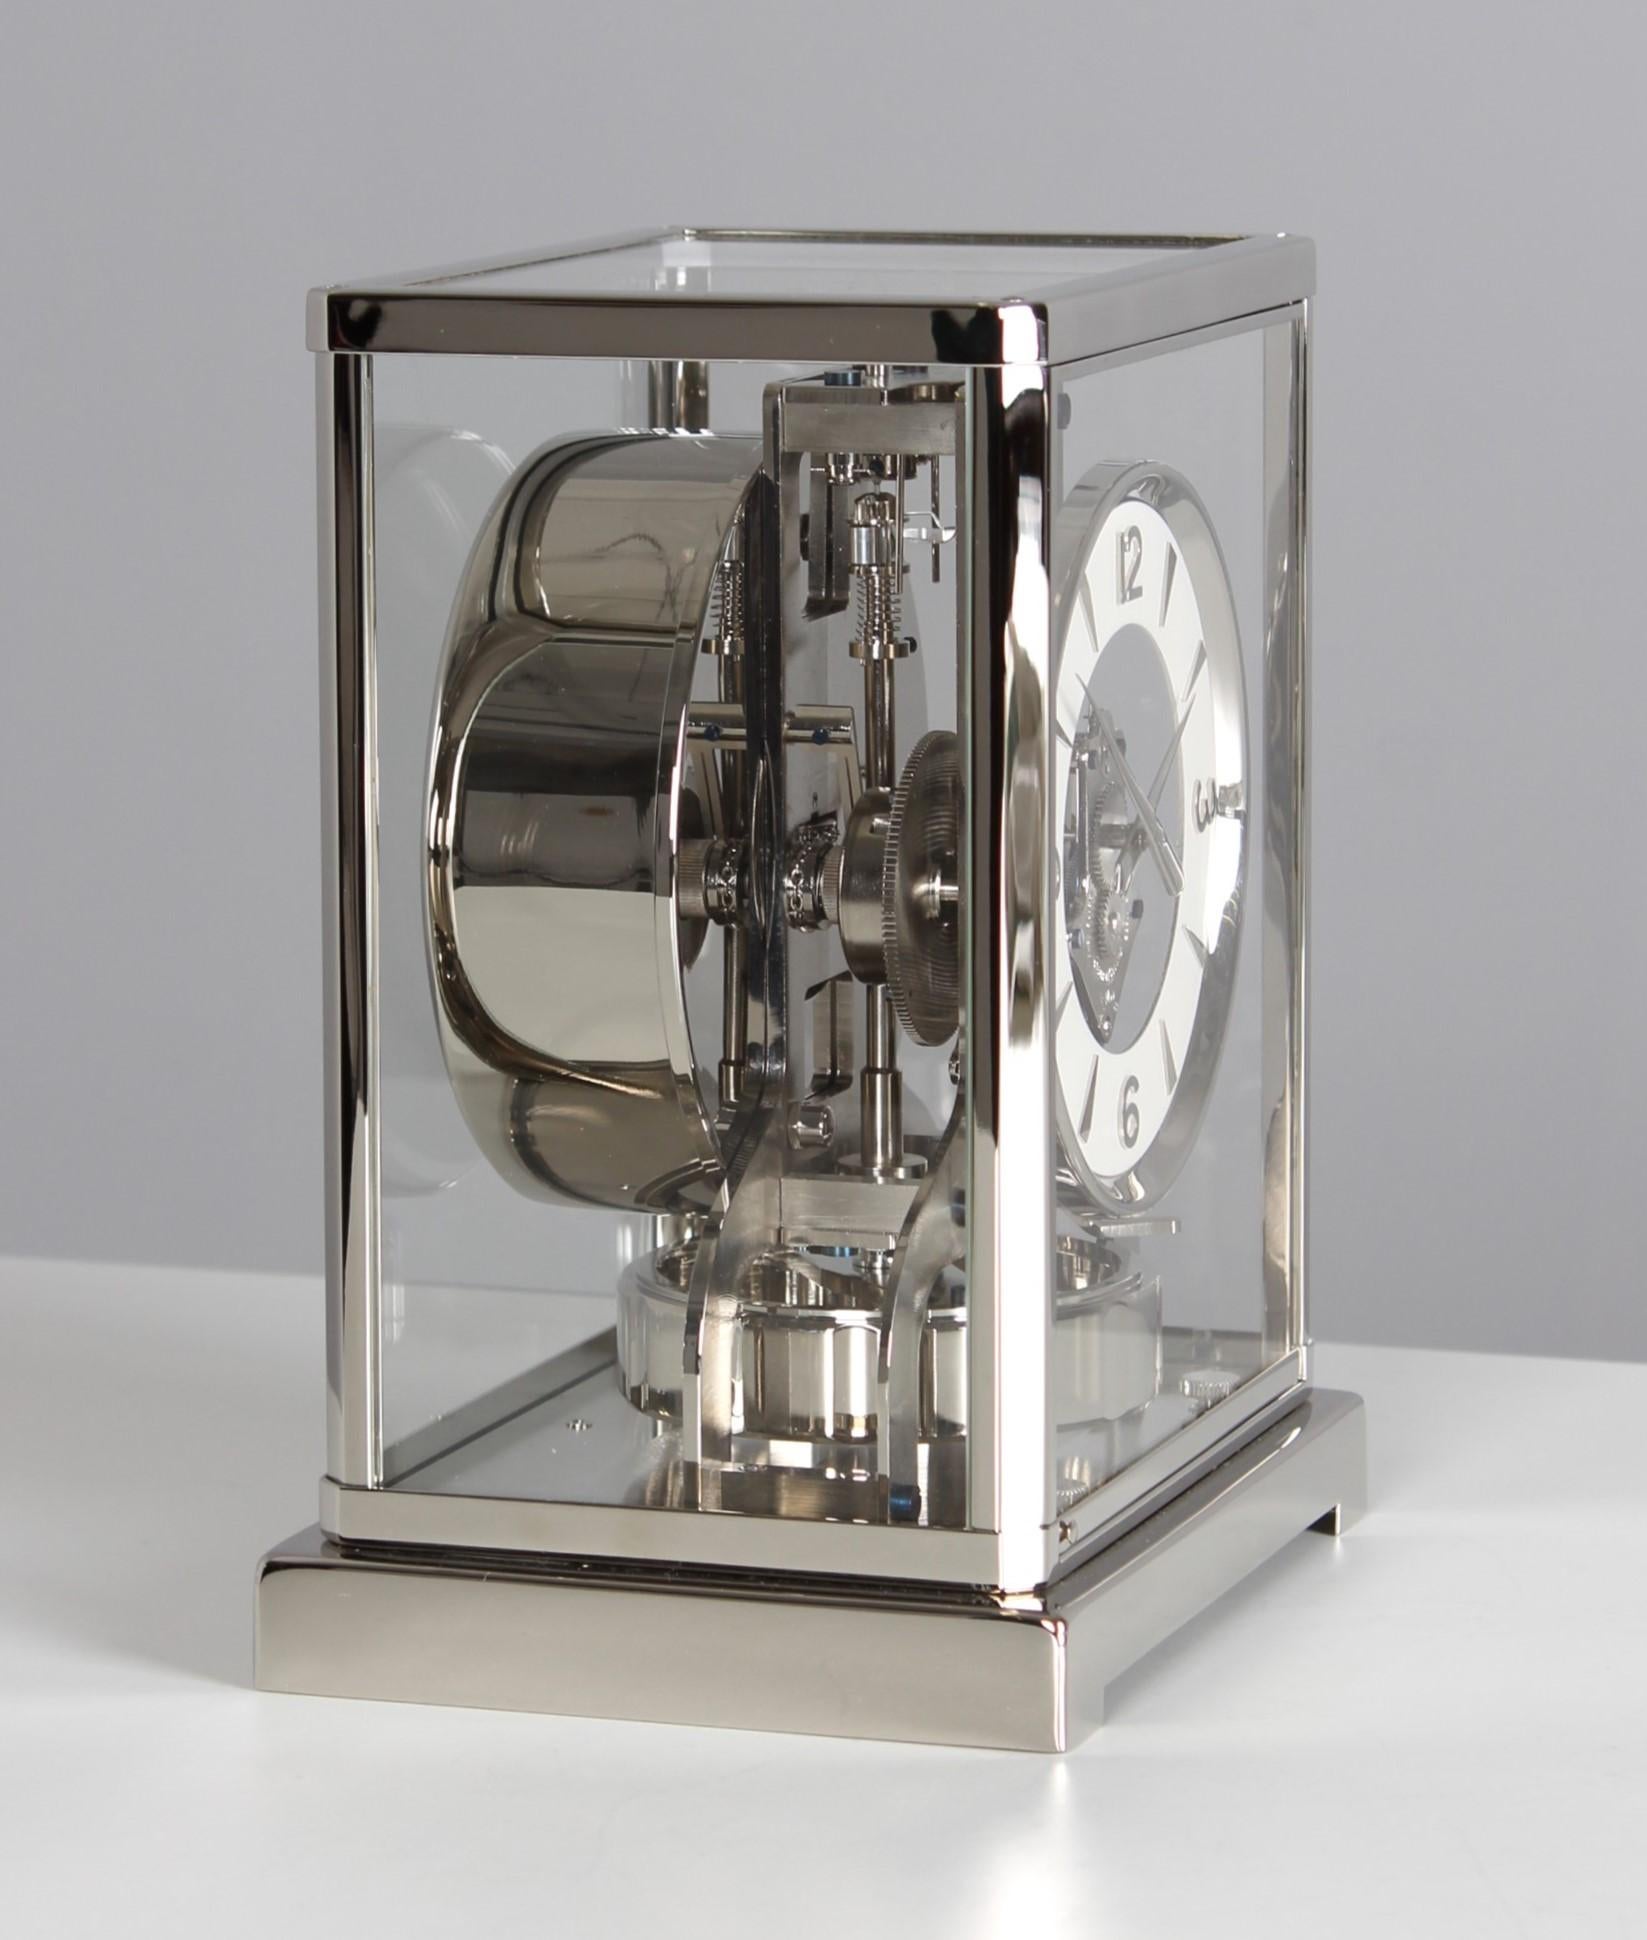 Jaeger LeCoultre, Silver Atmos Clock from 1955, Revised and New Nickel-Plated For Sale 1